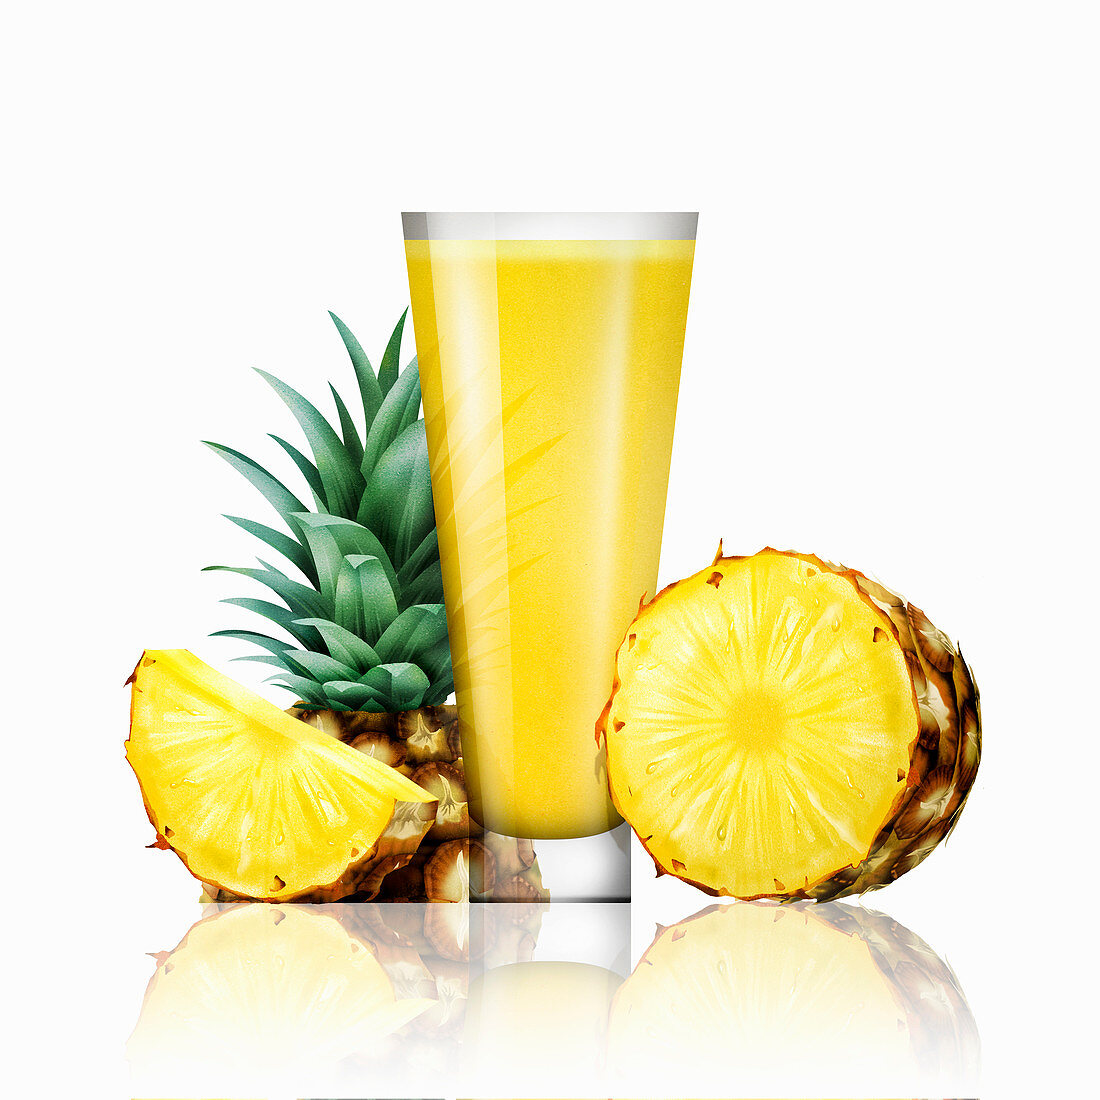 Fresh pineapple and glass of juice, illustration